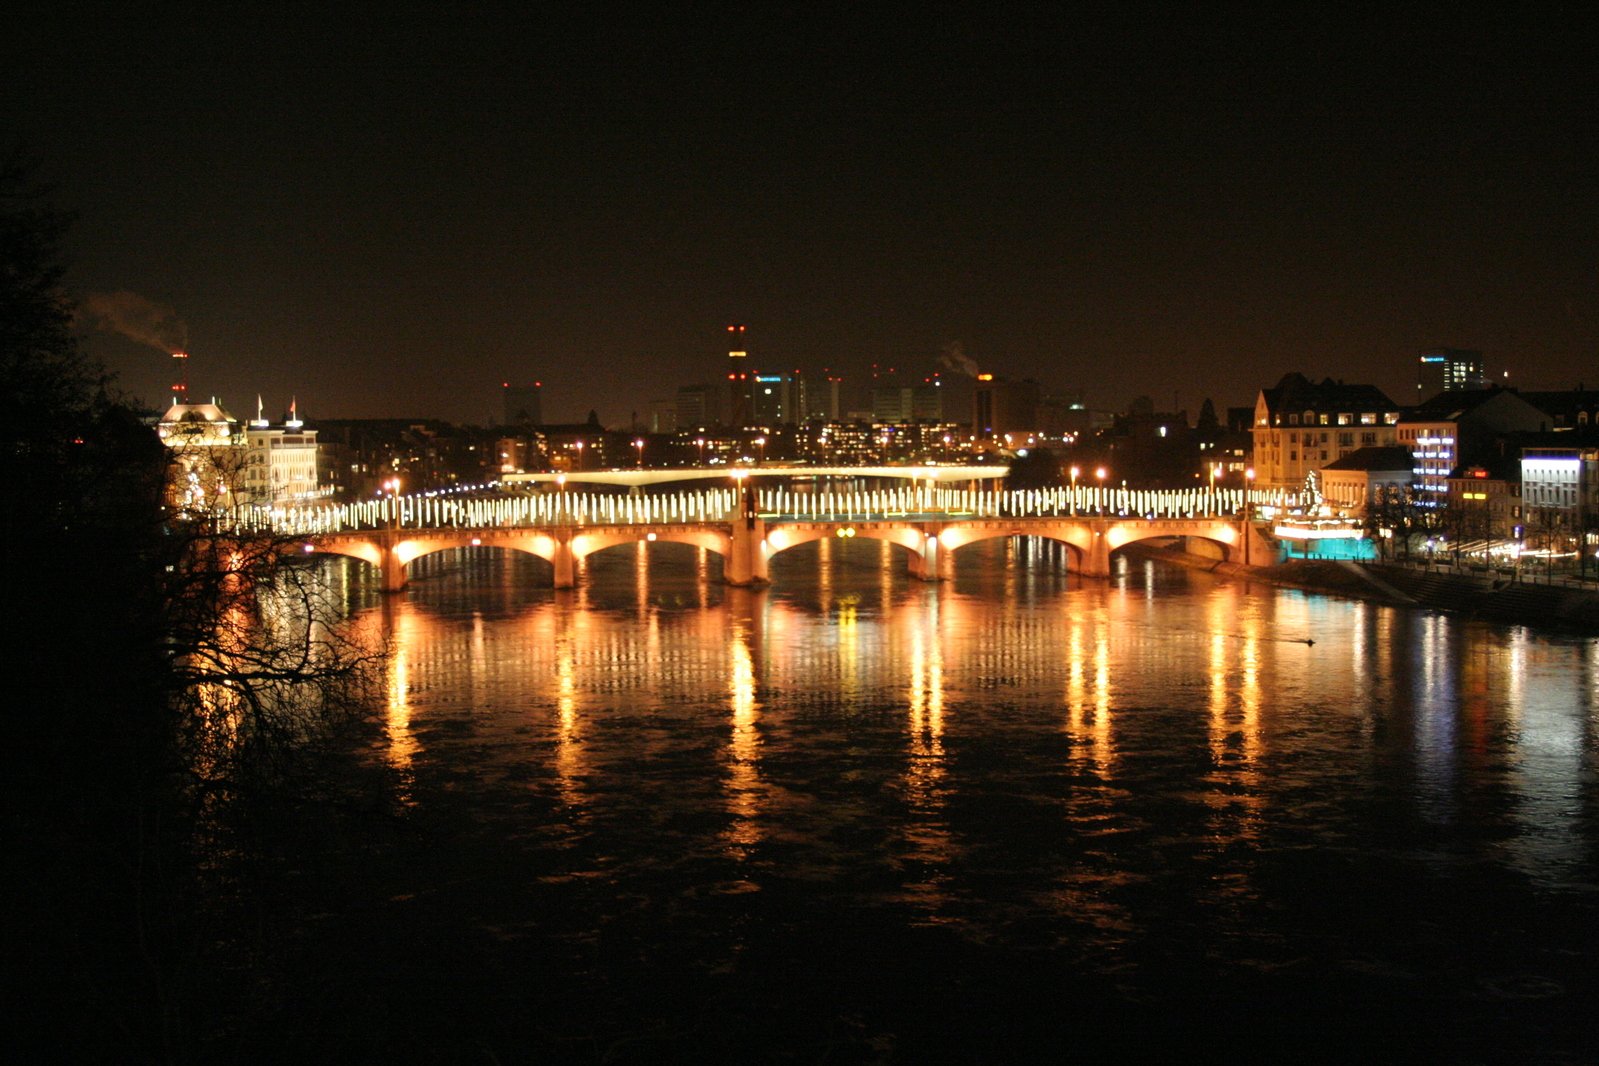 night view of lights on bridges in city and river